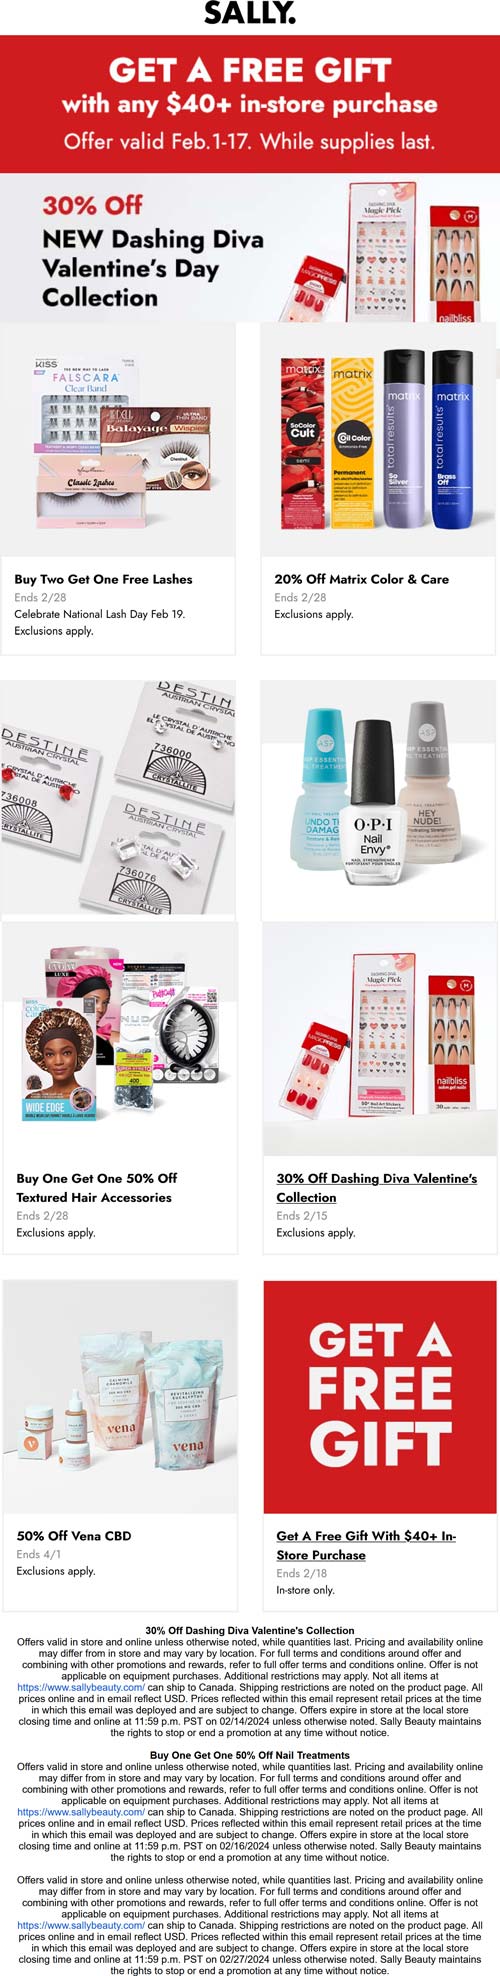 Free gift on $40, 30% off valentines collection & more at Sally #sally